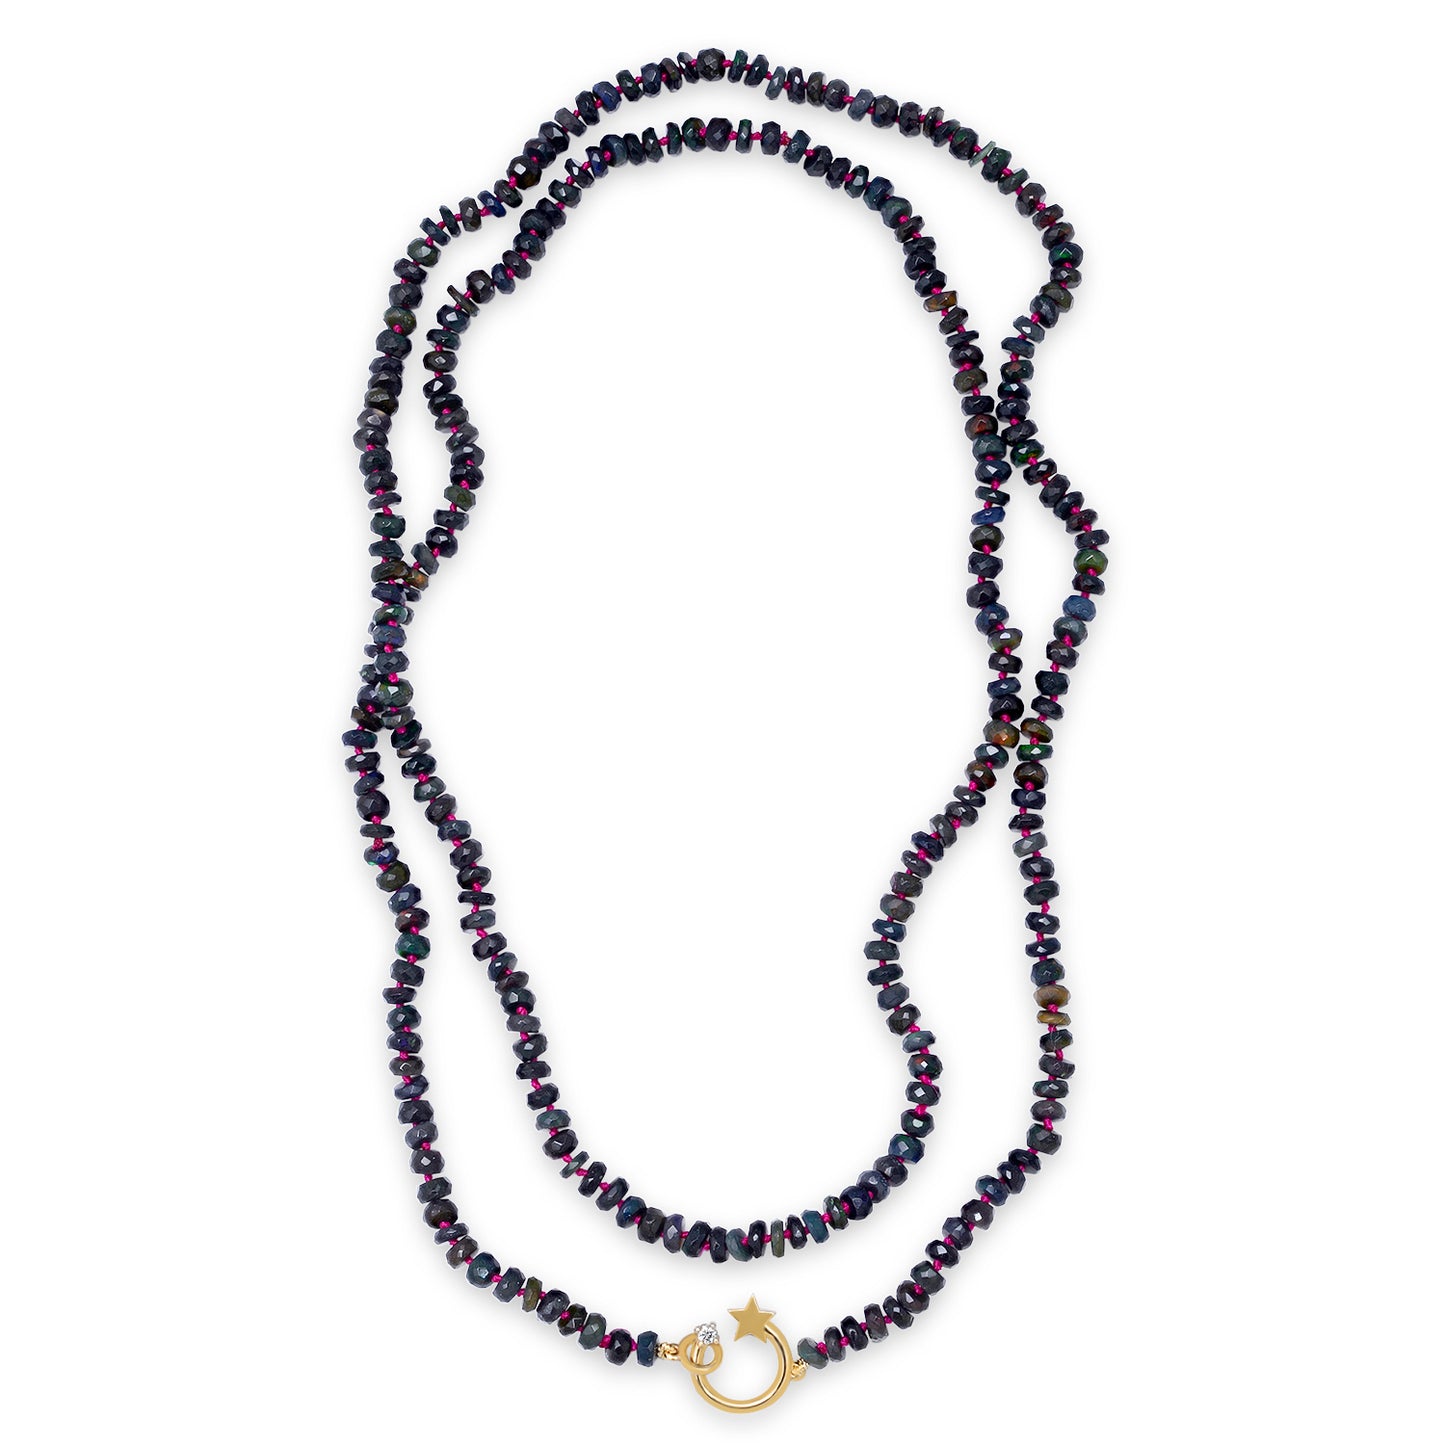 Shooting Star Black Opal Beaded Necklace